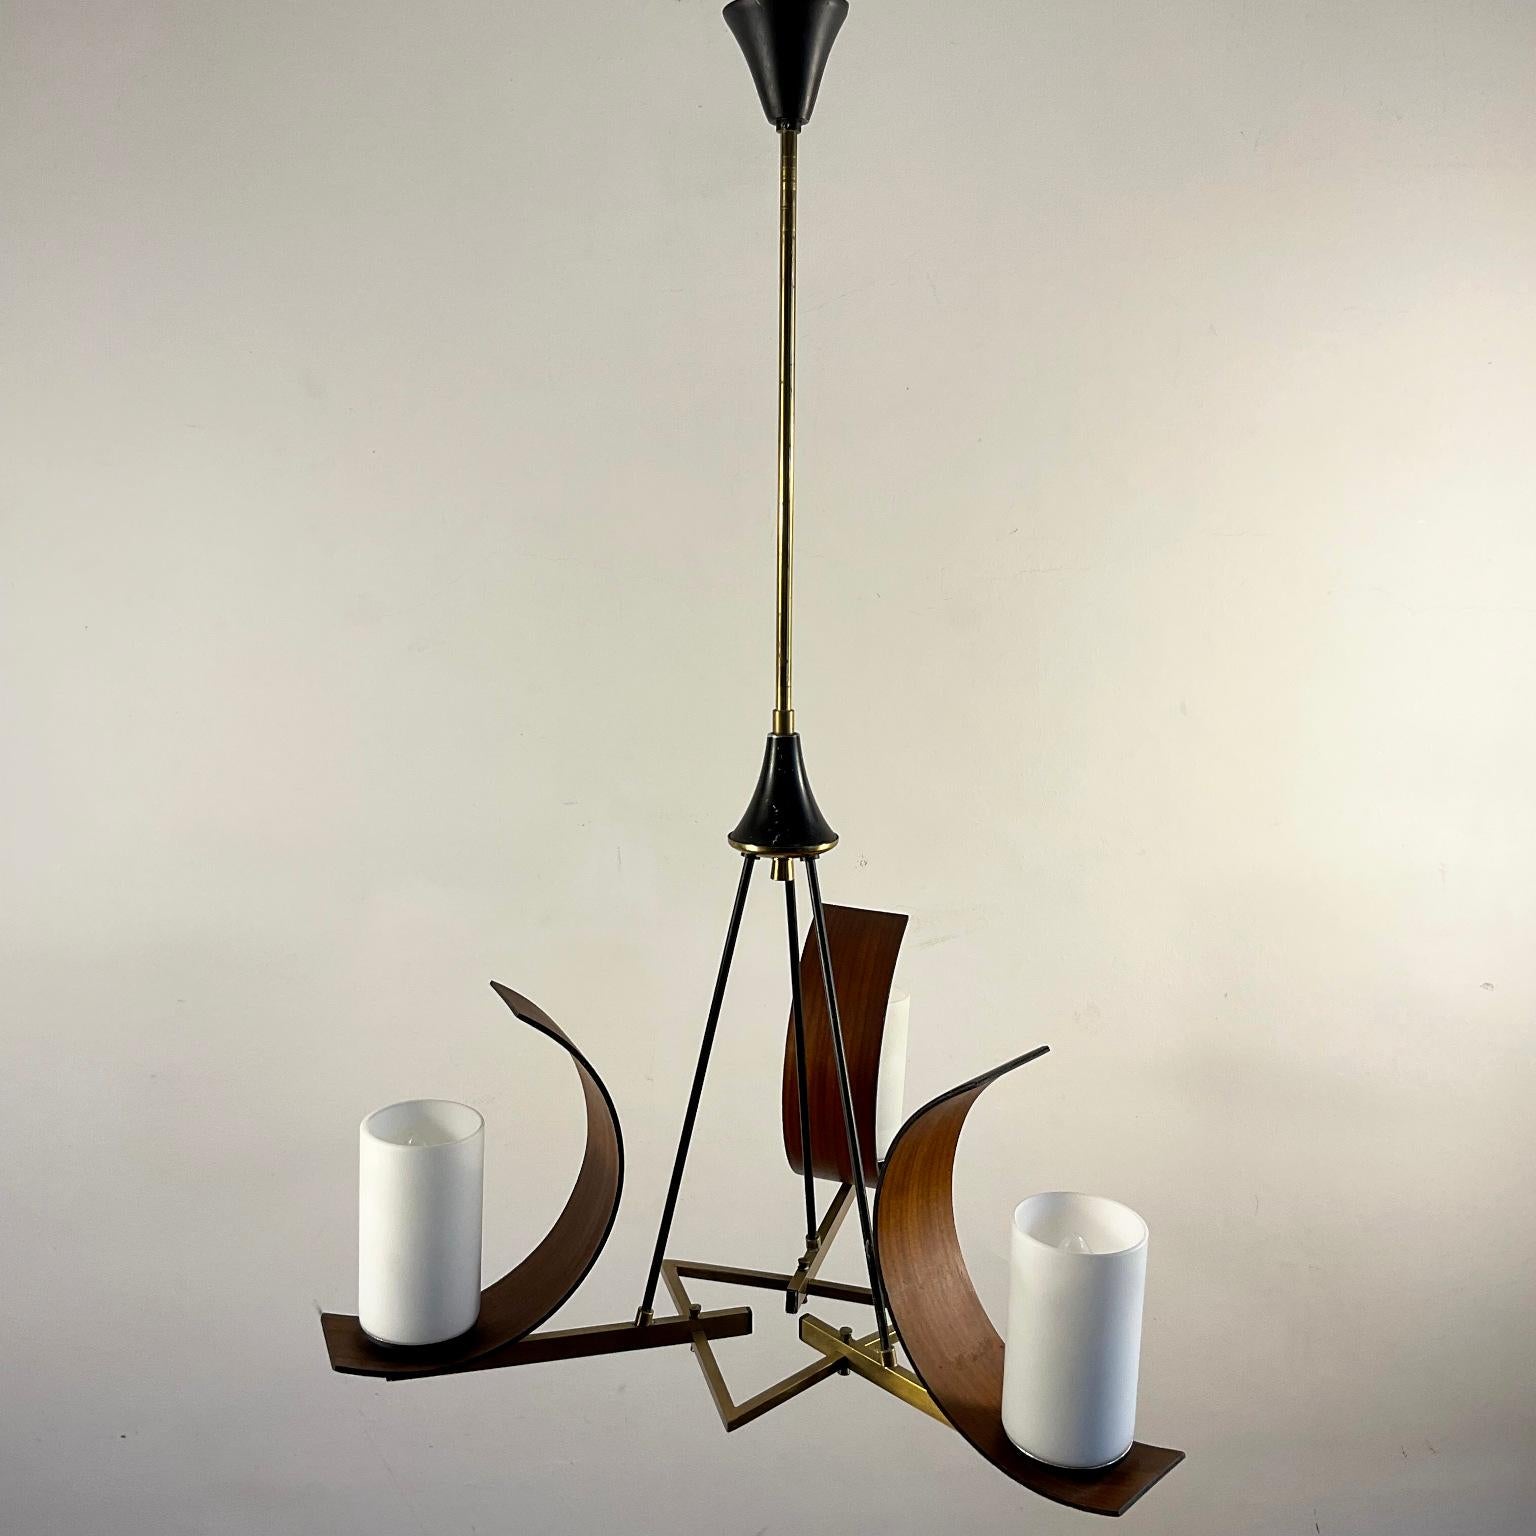 Mid-Century Modern 1960s Italian Ceiling Lamp Attributed to Stilnovo with 3 Opaline lampshades